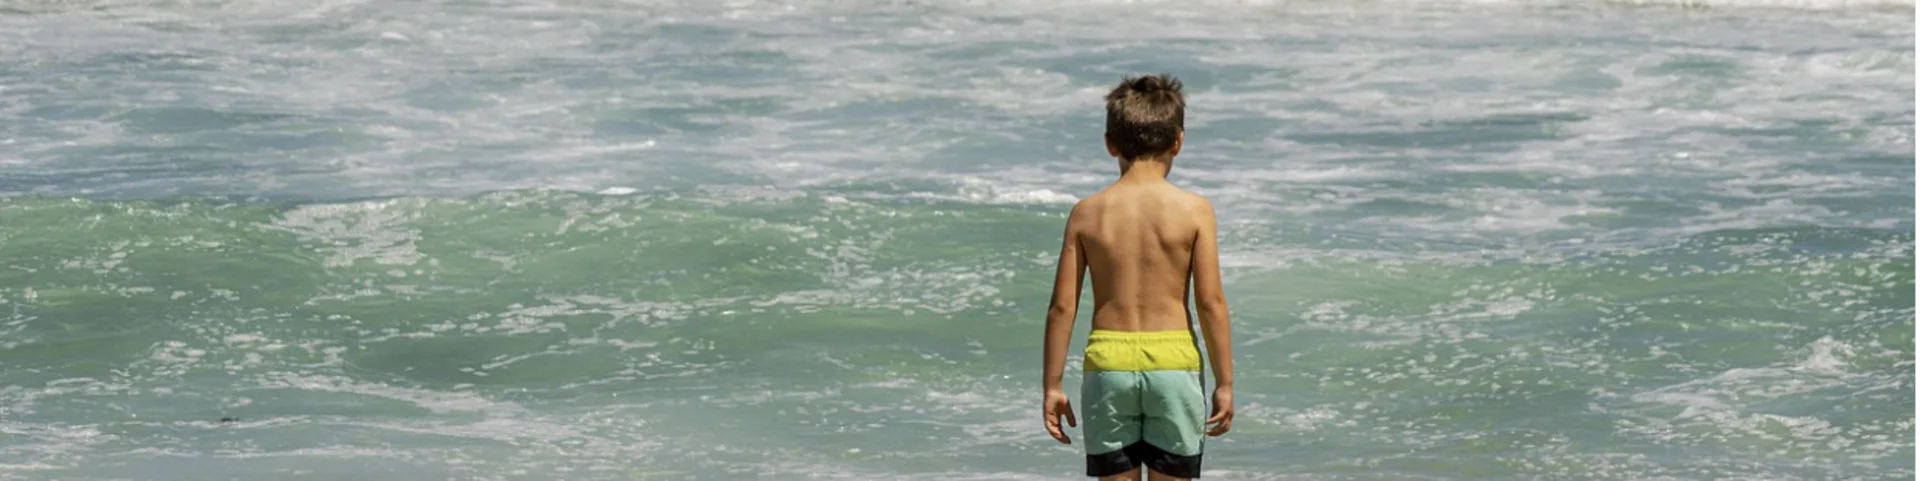 The colour of your child's bathing suit could make swim time safer